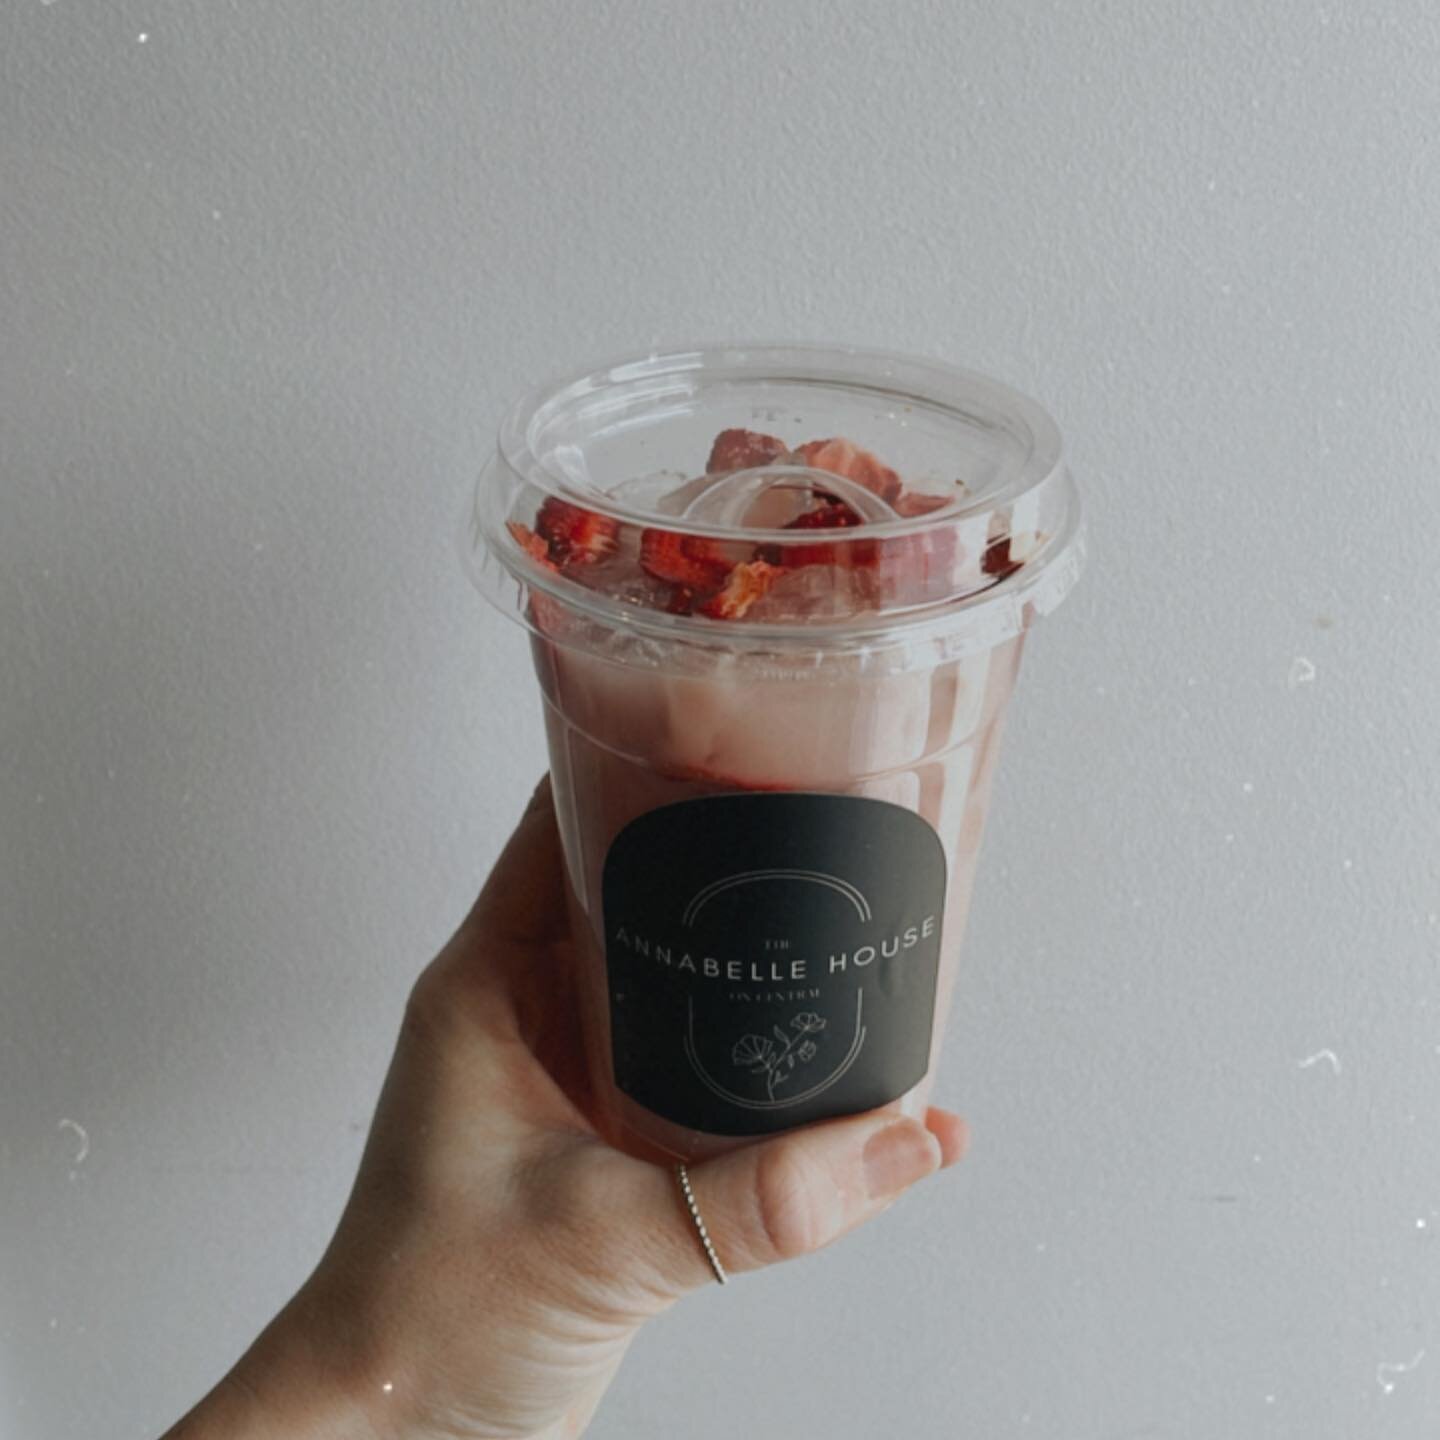 New drink(s) alert! We couldn&rsquo;t pass on a chance to bring some pink into our lives - available now: The pink drink (strawberry a&ccedil;a&iacute;, raspberry, &amp; coconut milk), Strawberry A&ccedil;a&iacute; refresher (strawberry acai refreshe